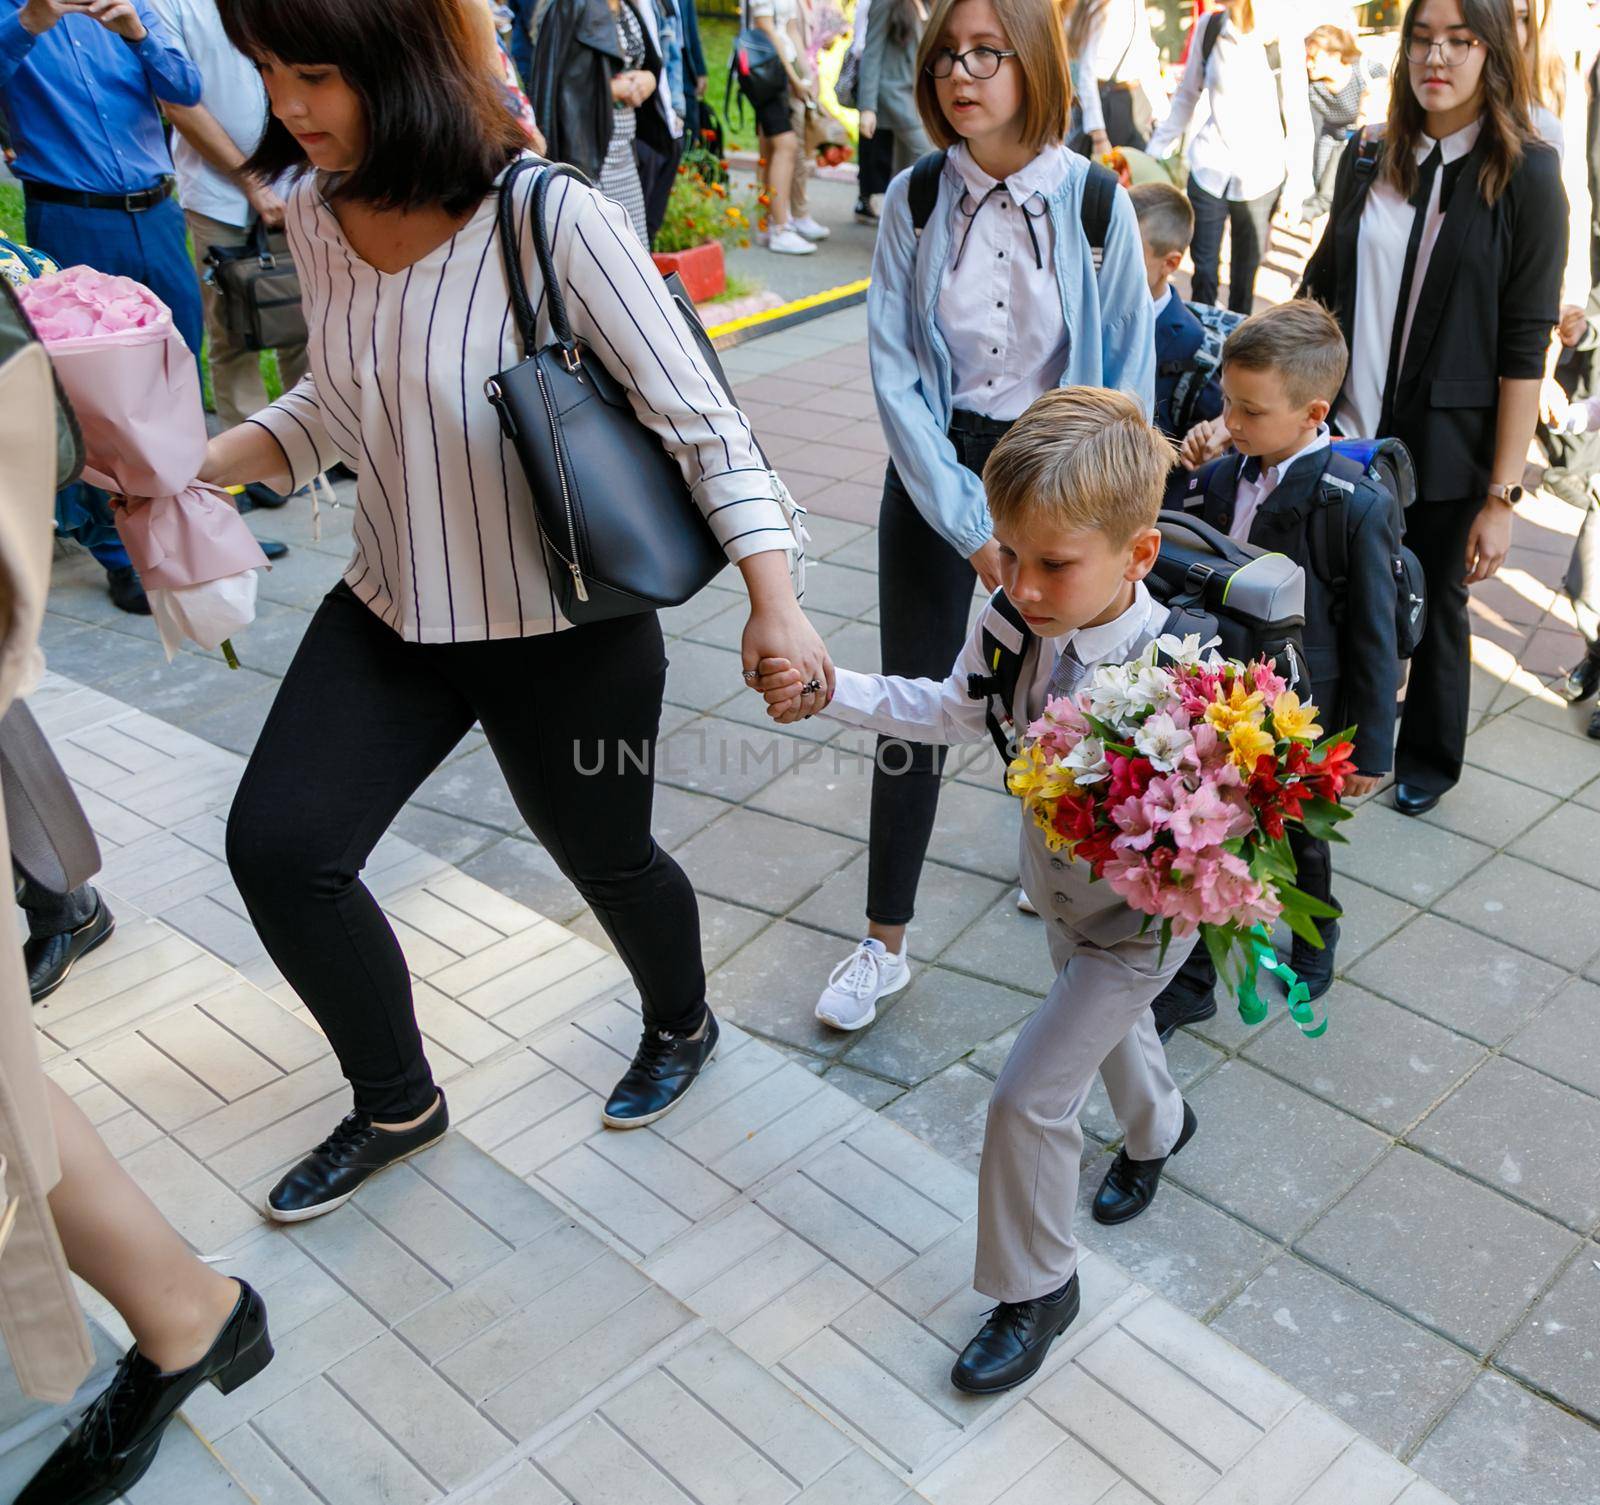 First graders with their parents go to school. First of September. School. First grade. Moscow, Russia, September 2, 2019